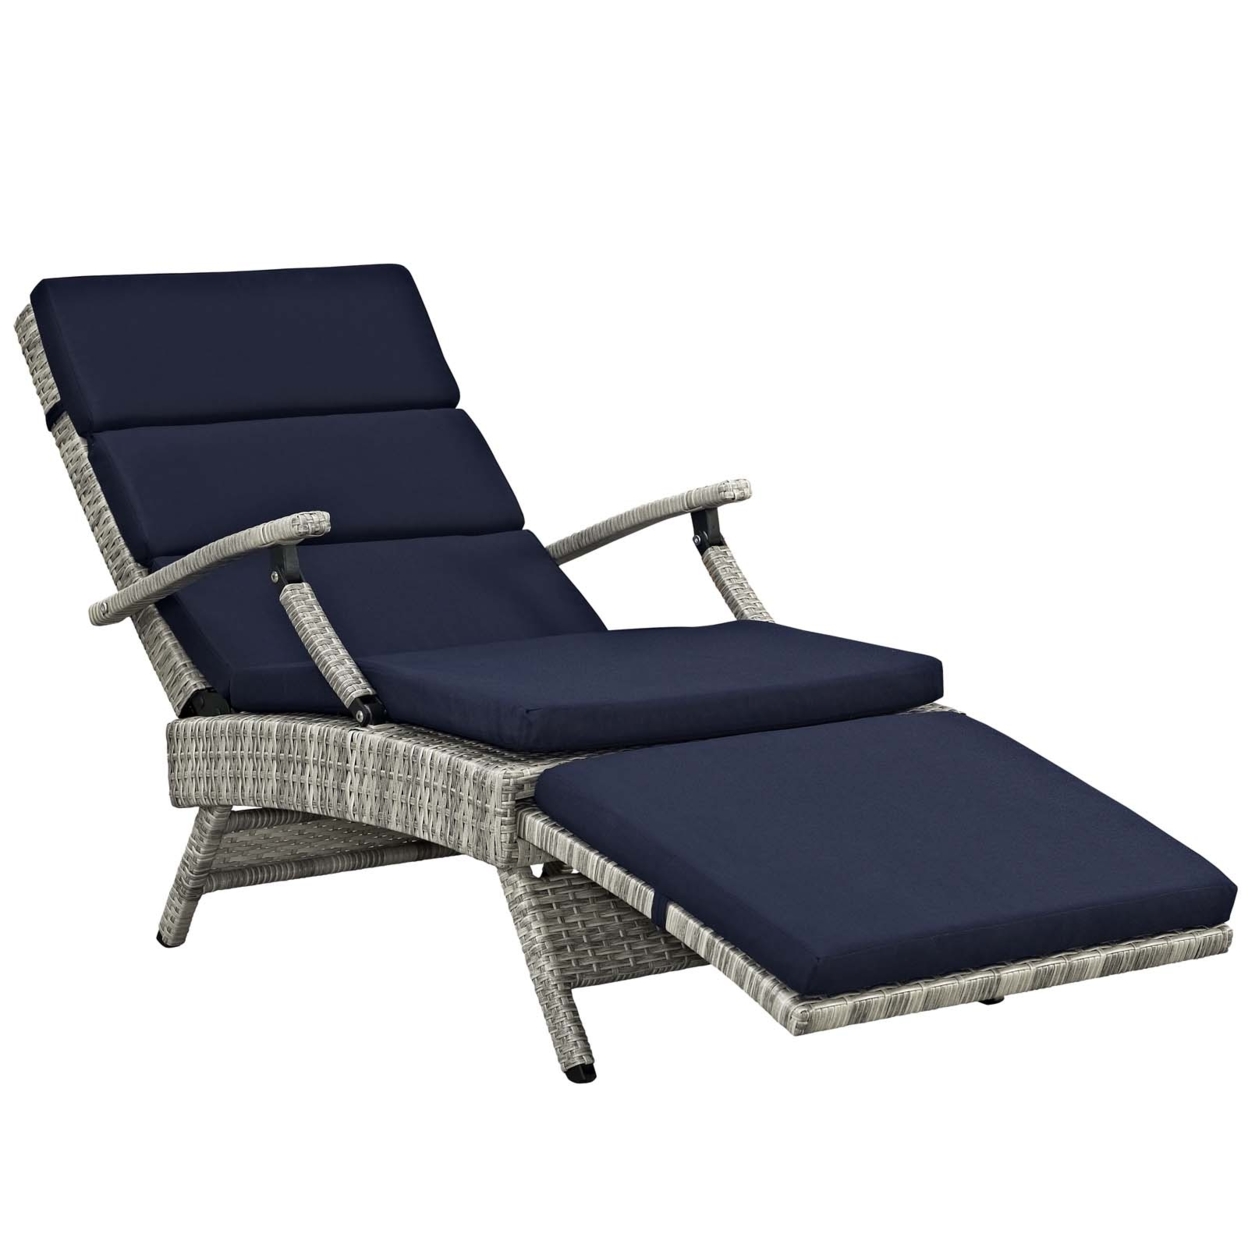 Envisage Chaise Outdoor Patio Wicker Rattan Lounge Chair,Light Gray Navy